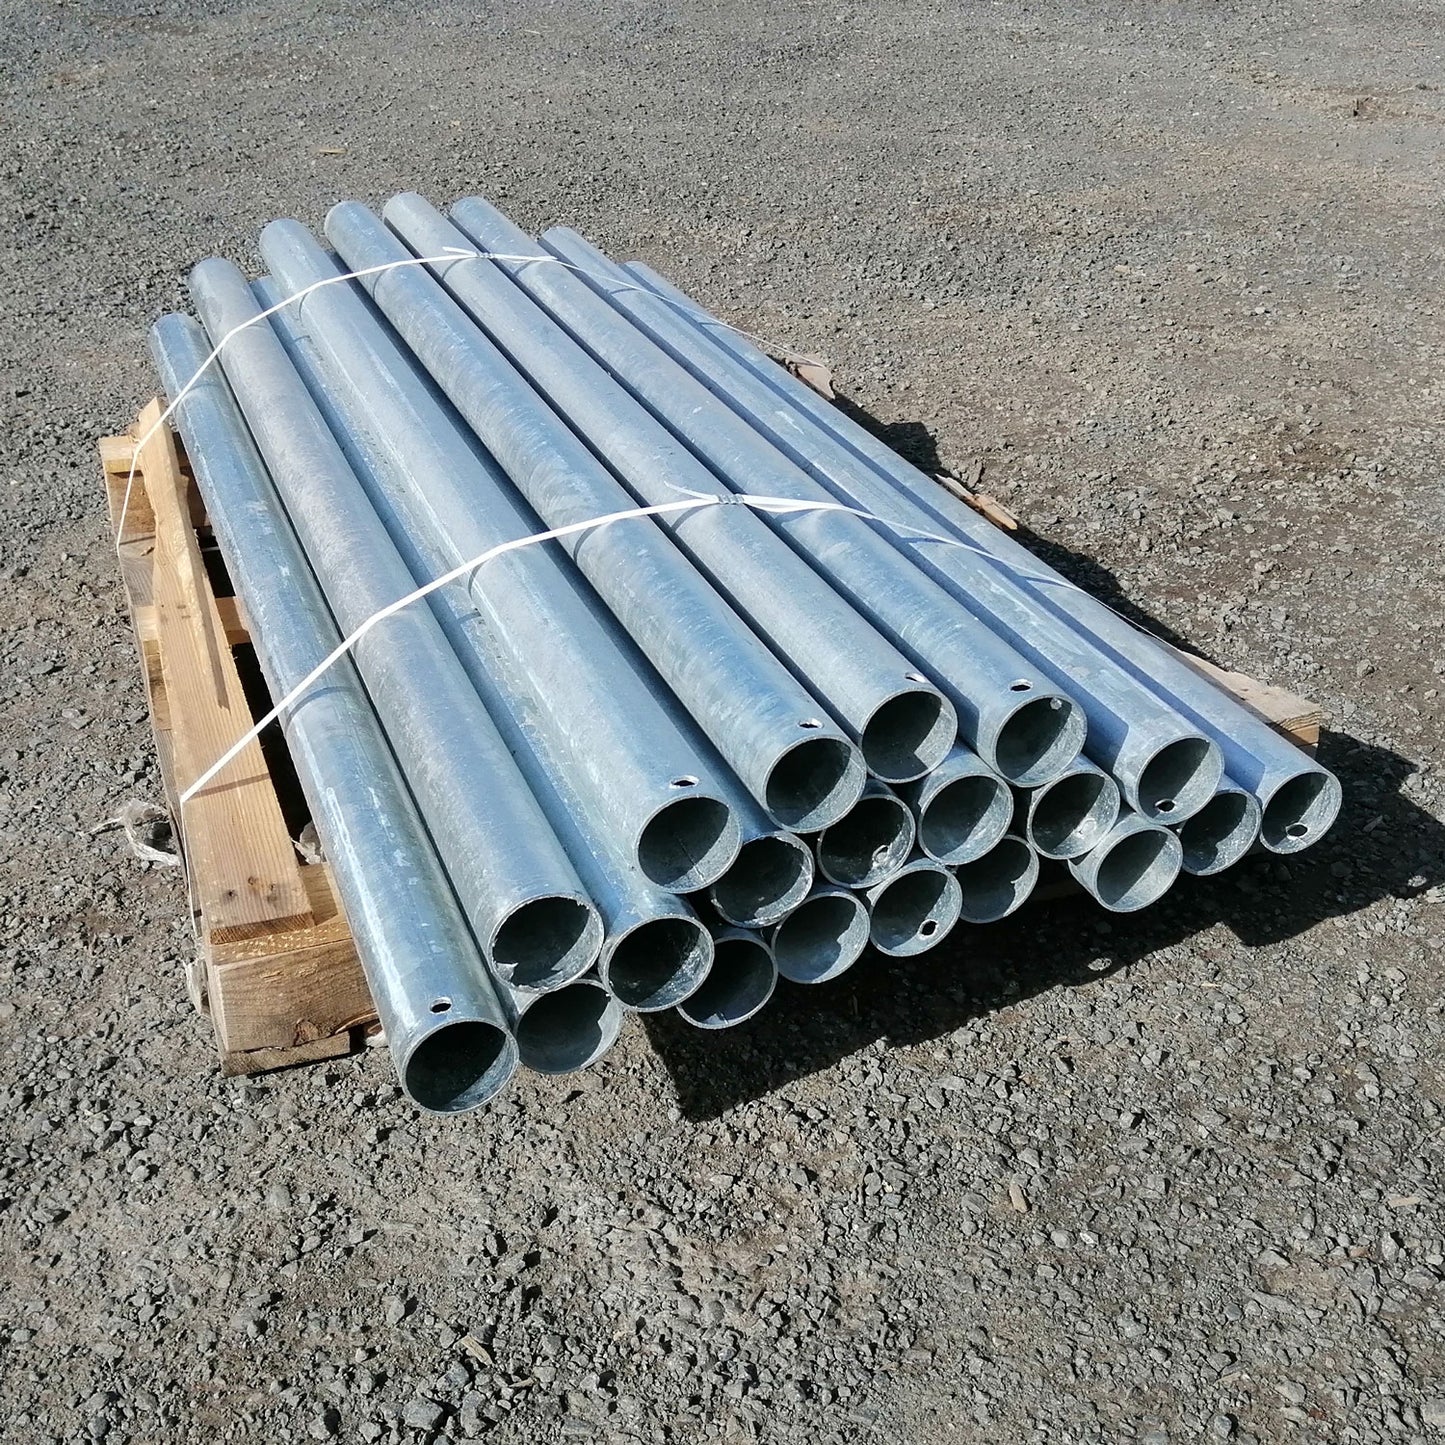 Clearance Offer - Circular Hollow Section Posts Bundle Deal